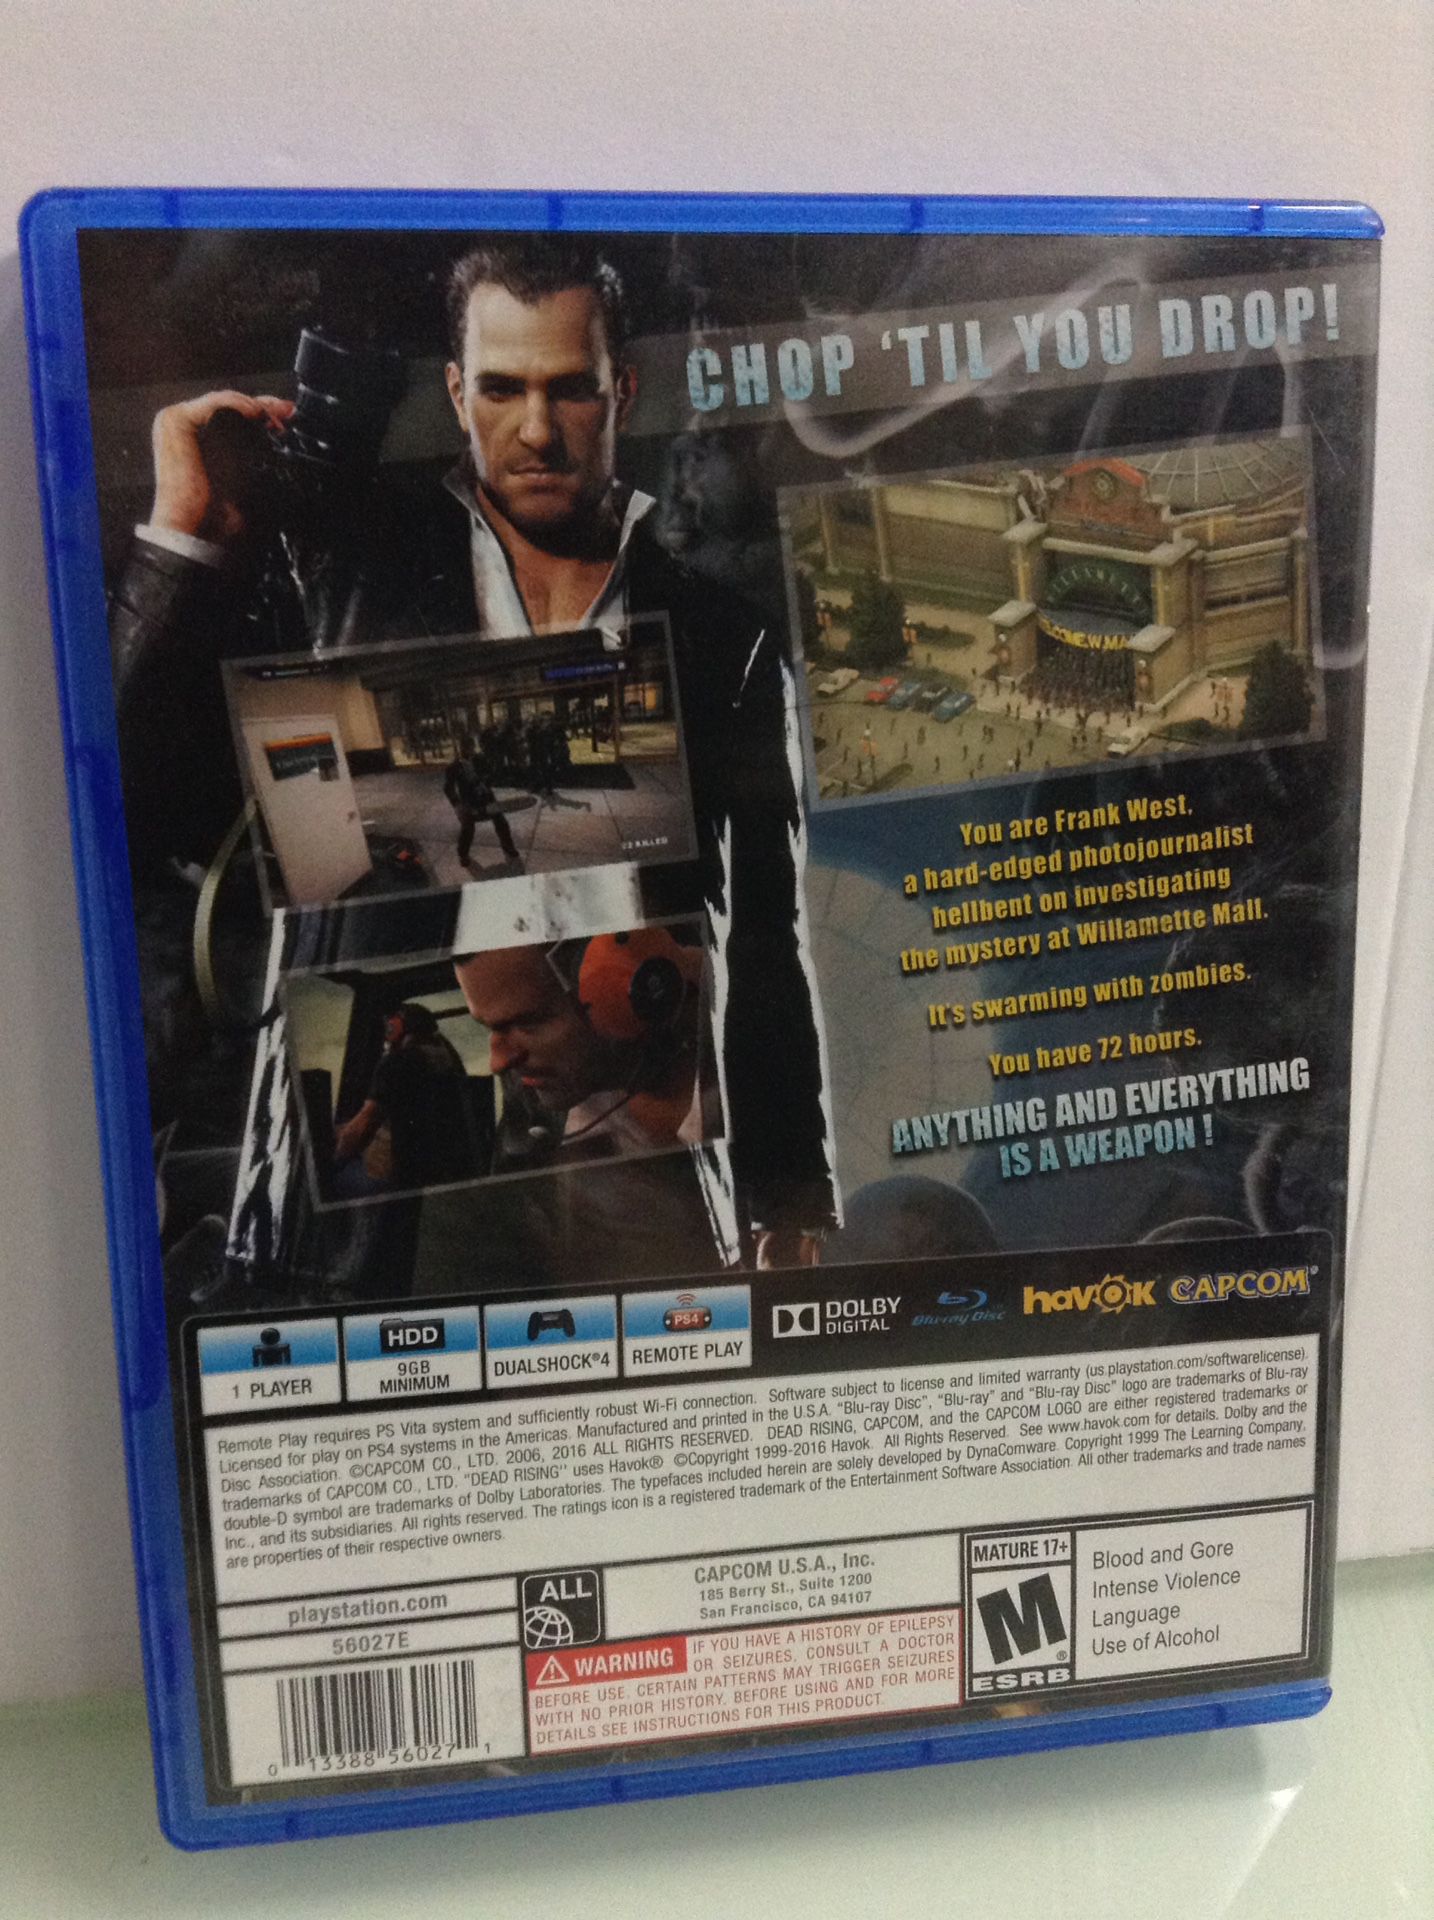 Ps4 PlayStation 4 Game Dead Rising for Sale in Homestead, FL